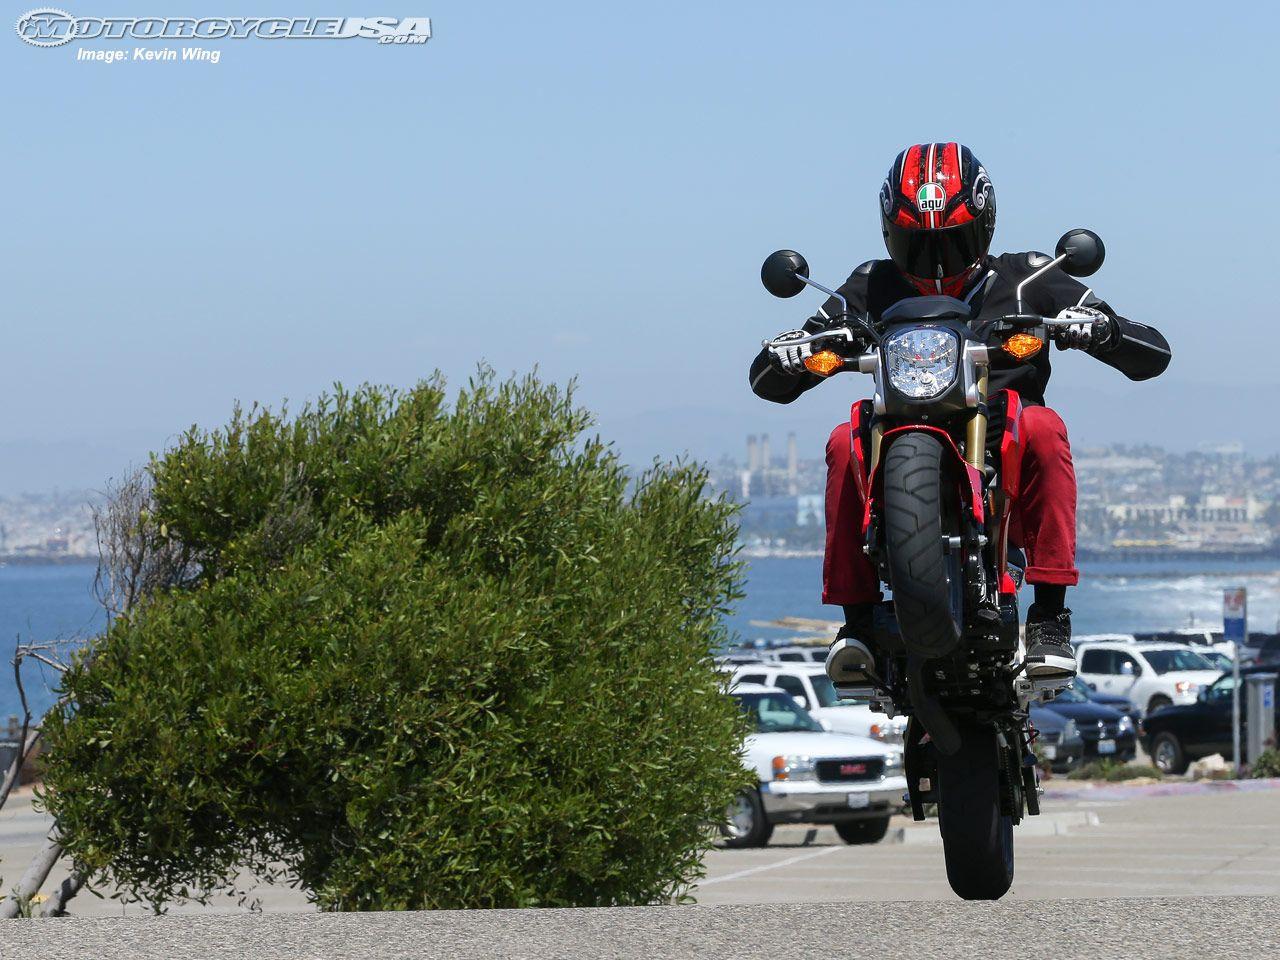 Motorcycle of the Year 2014: Honda Grom